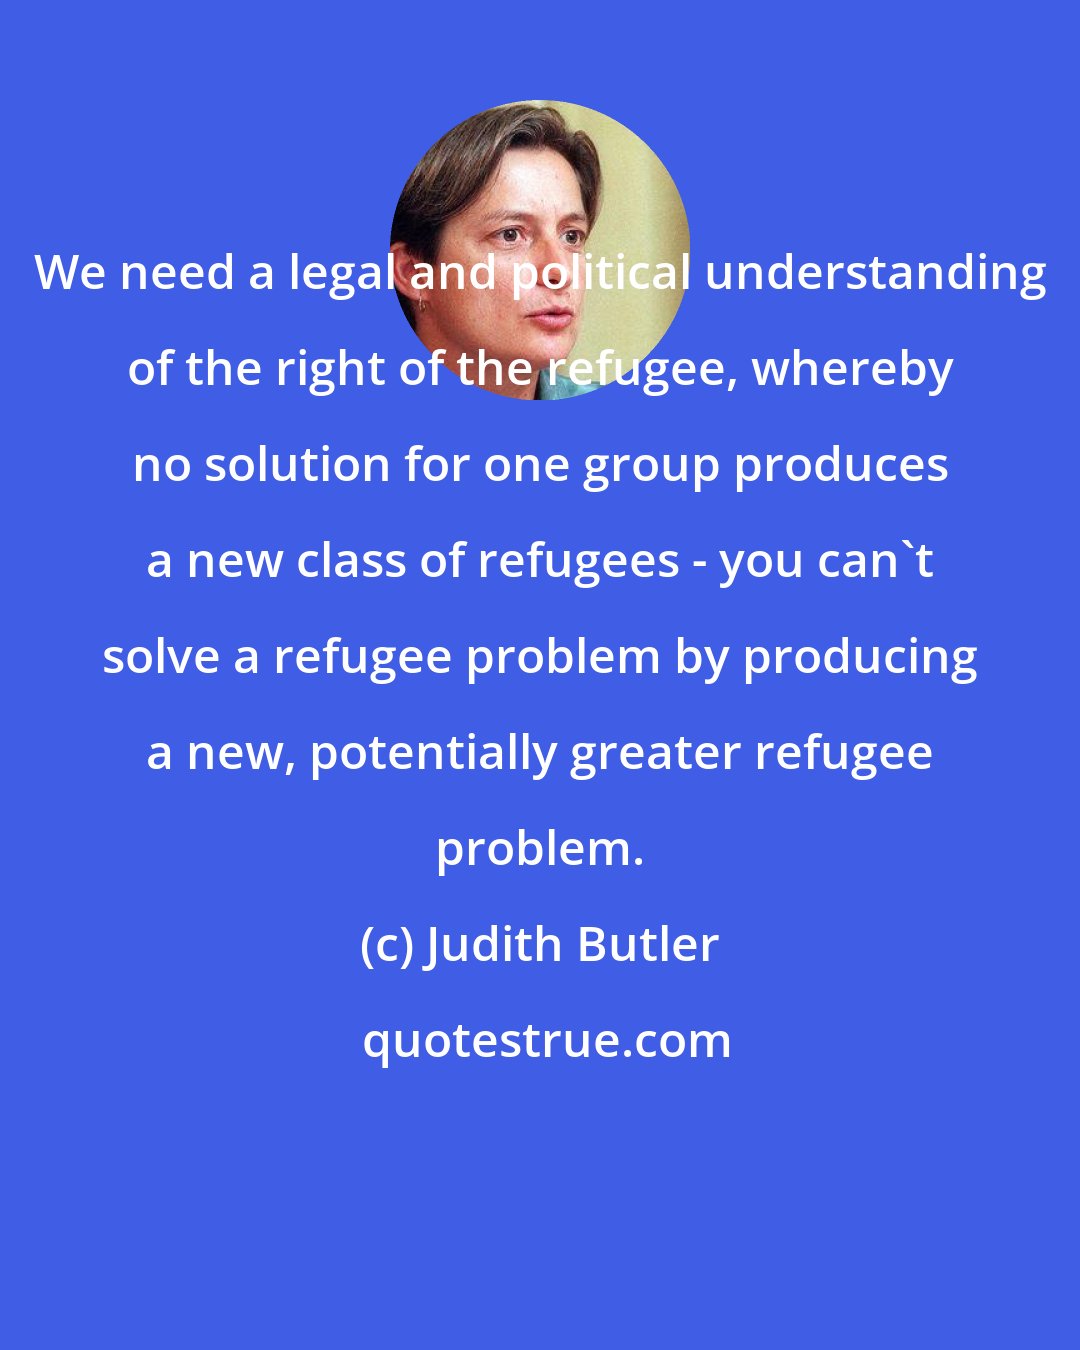 Judith Butler: We need a legal and political understanding of the right of the refugee, whereby no solution for one group produces a new class of refugees - you can't solve a refugee problem by producing a new, potentially greater refugee problem.